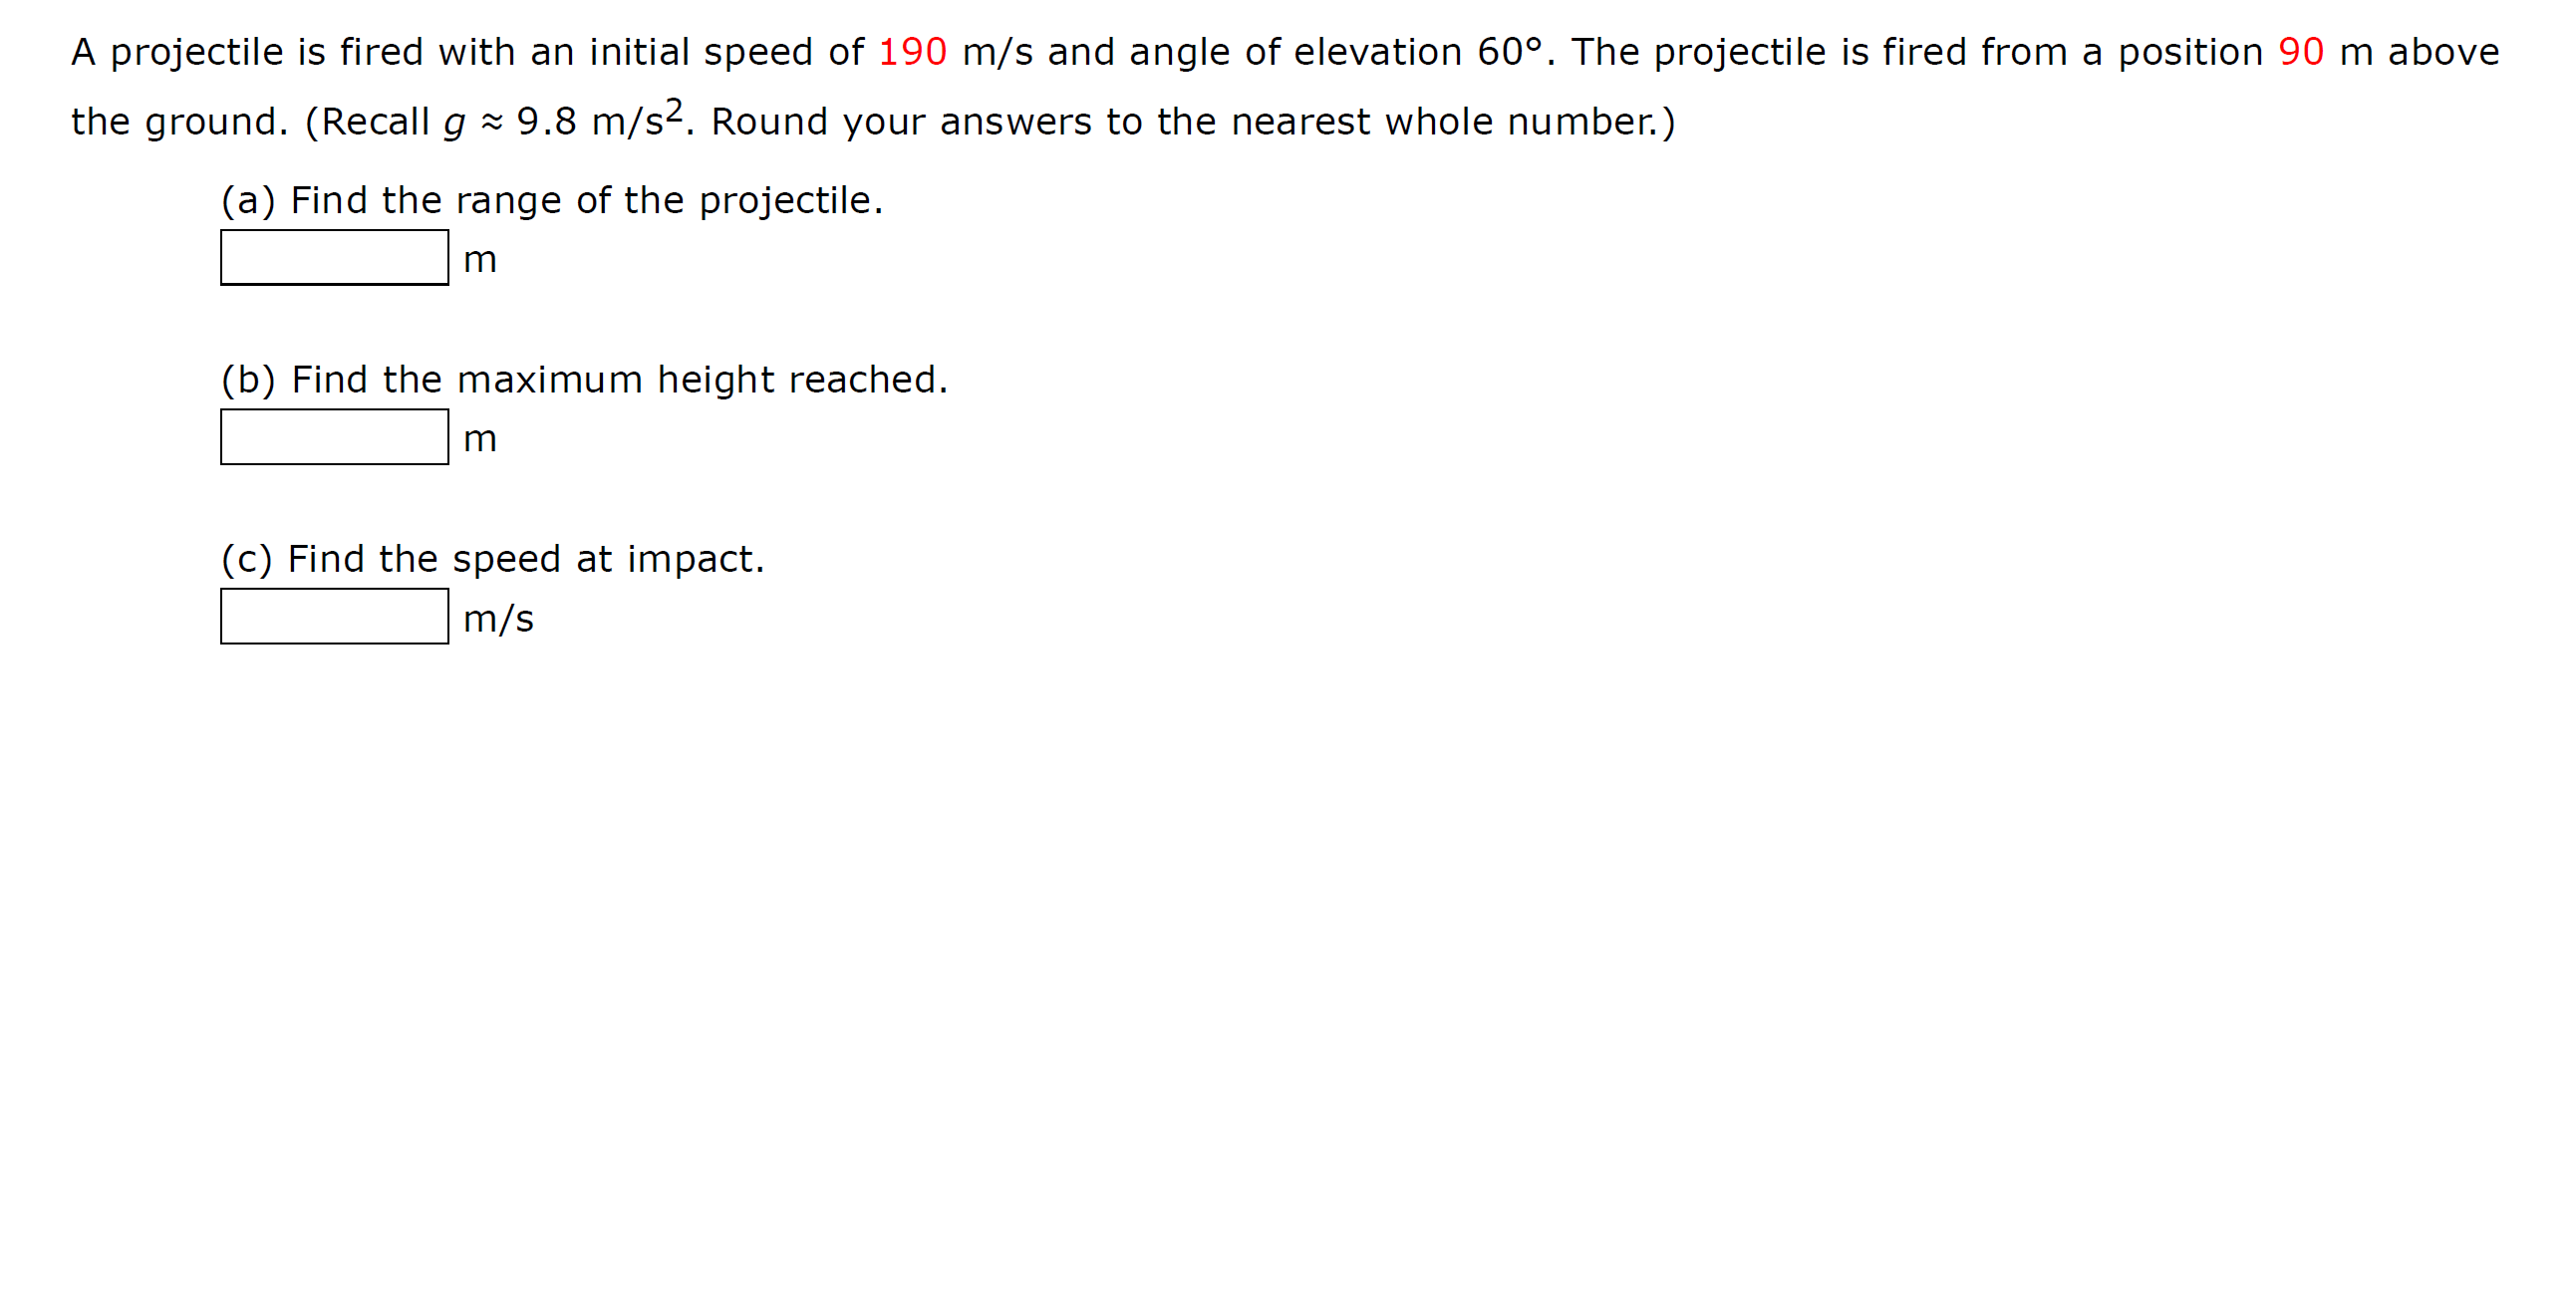 A projectile is fired with an initial speed of 190 m/s and angle of elevation 60°. The projectile is fired from a position 90 m above
the ground. (Recall g x 9.8 m/s2. Round your answers to the nearest whole number.)
(a) Find the range of the projectile.
m
(b) Find the maximum height reached.
(c) Find the speed at impact.
m/s
